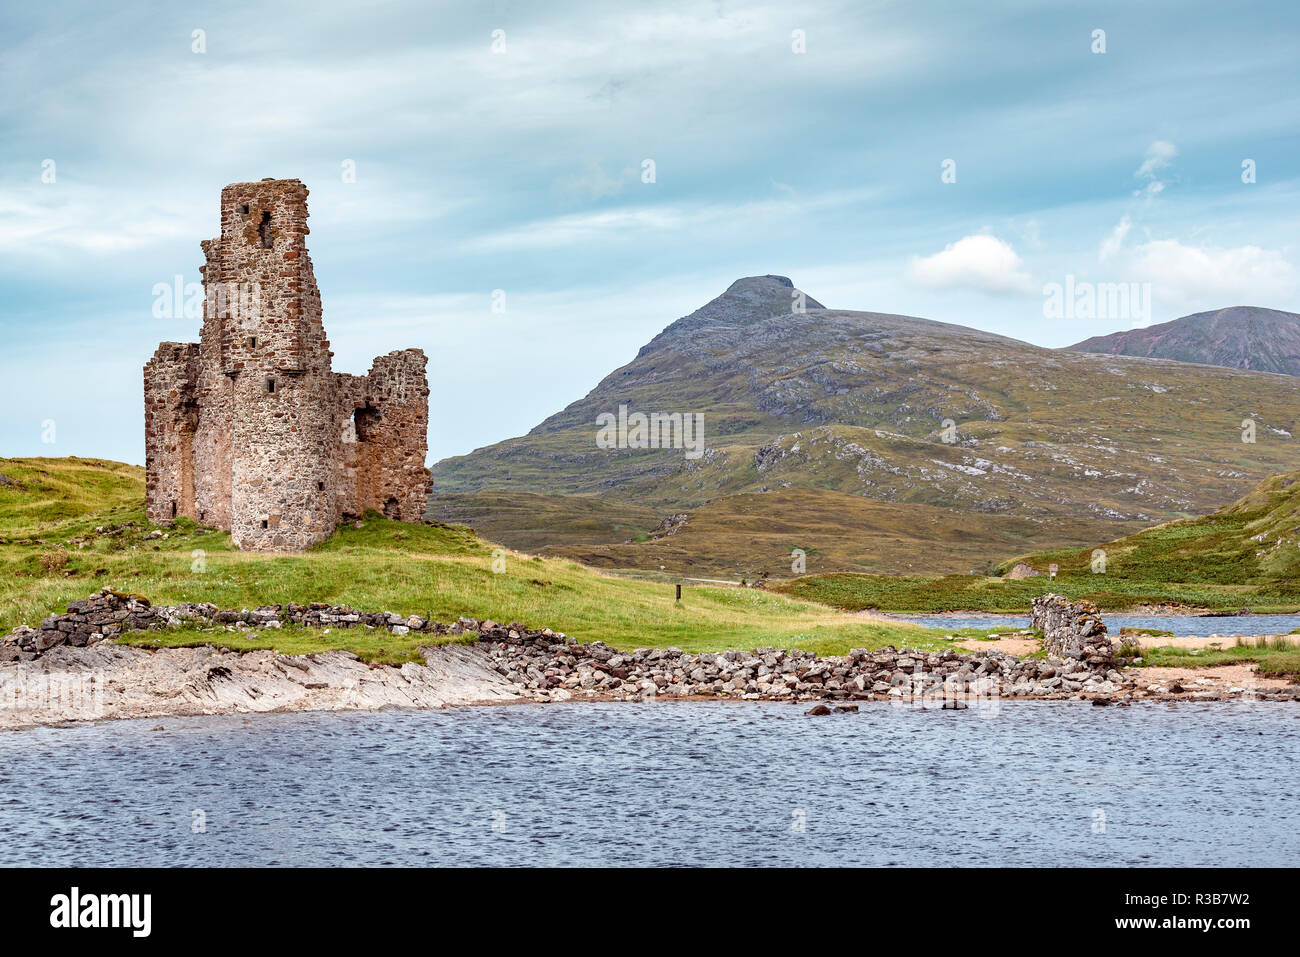 Castle ruin Ardvreck Castle on a peninsula by lake Loch Assynt, Sutherland, Scottish Highlands, Scotland, Great Britain Stock Photo